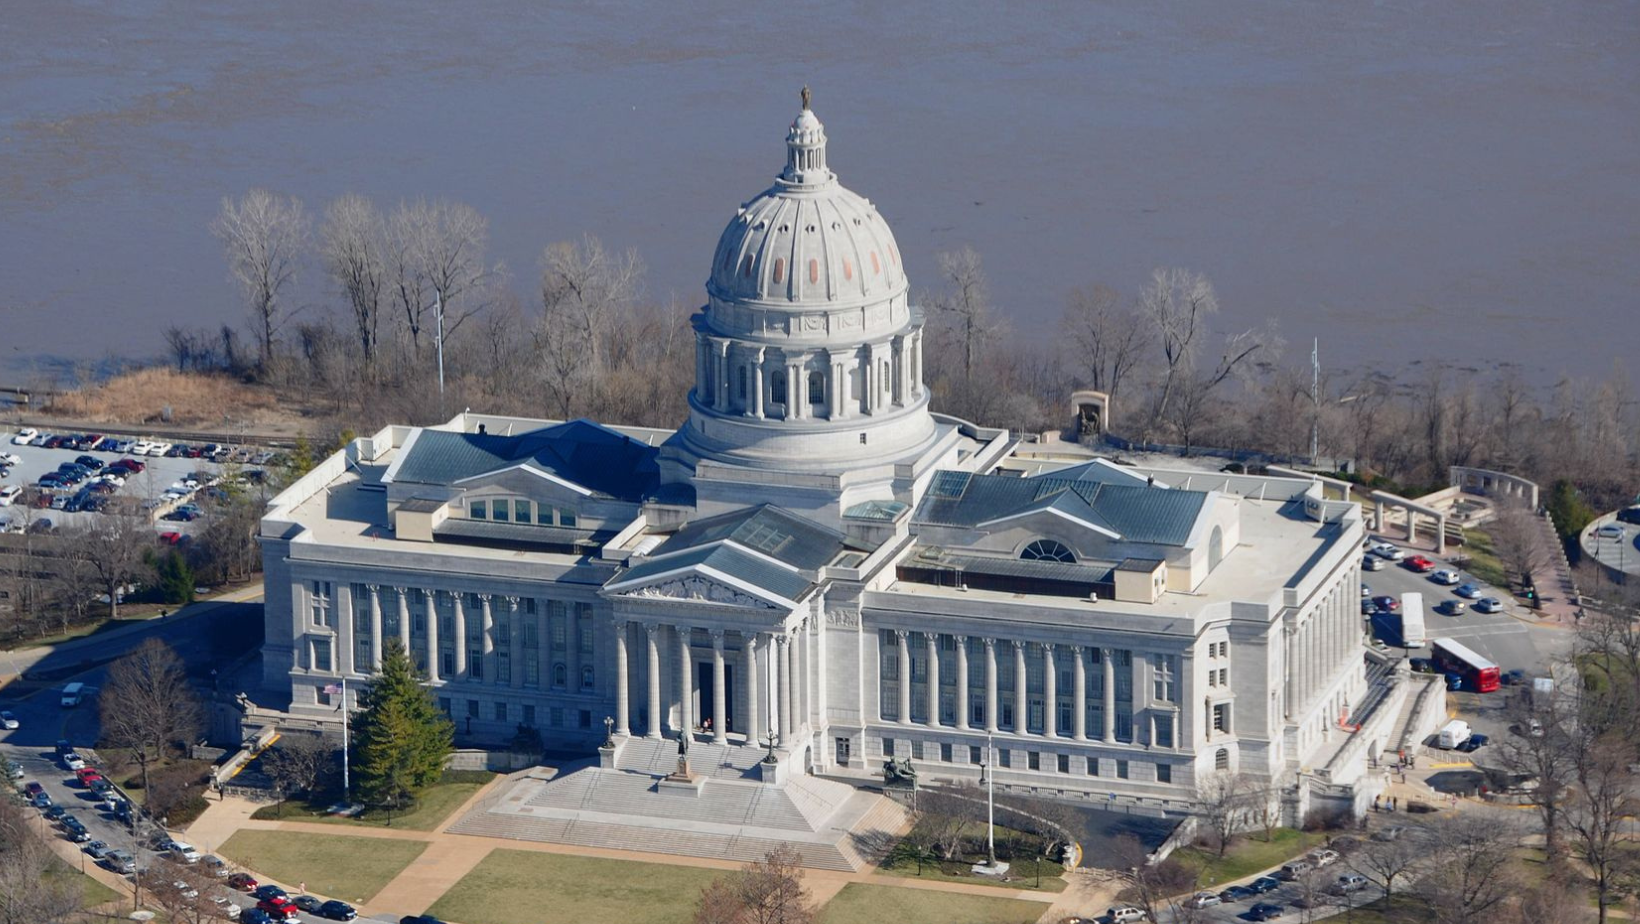 Aerial view of the Missouri State Capitol building on the river in Jefferson City, Missouri.